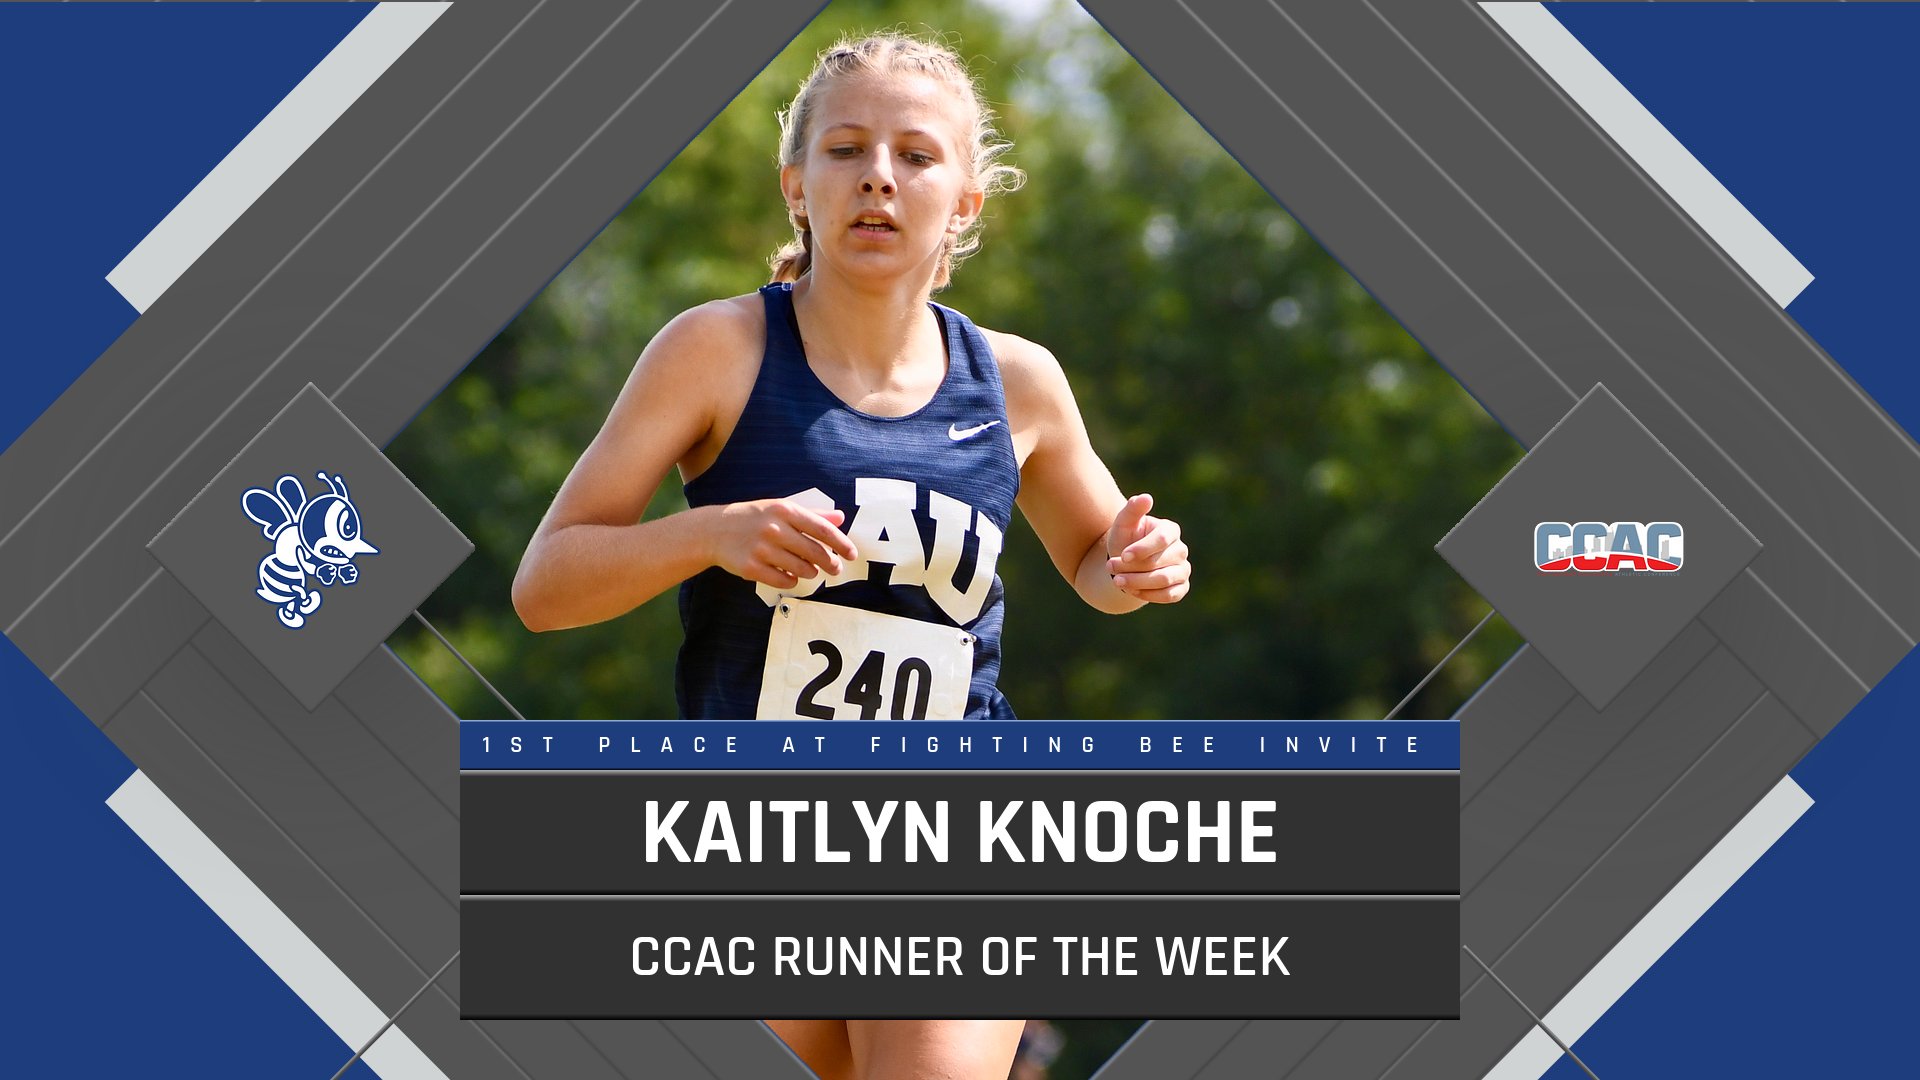 Knoche named CCAC Runner of the Week